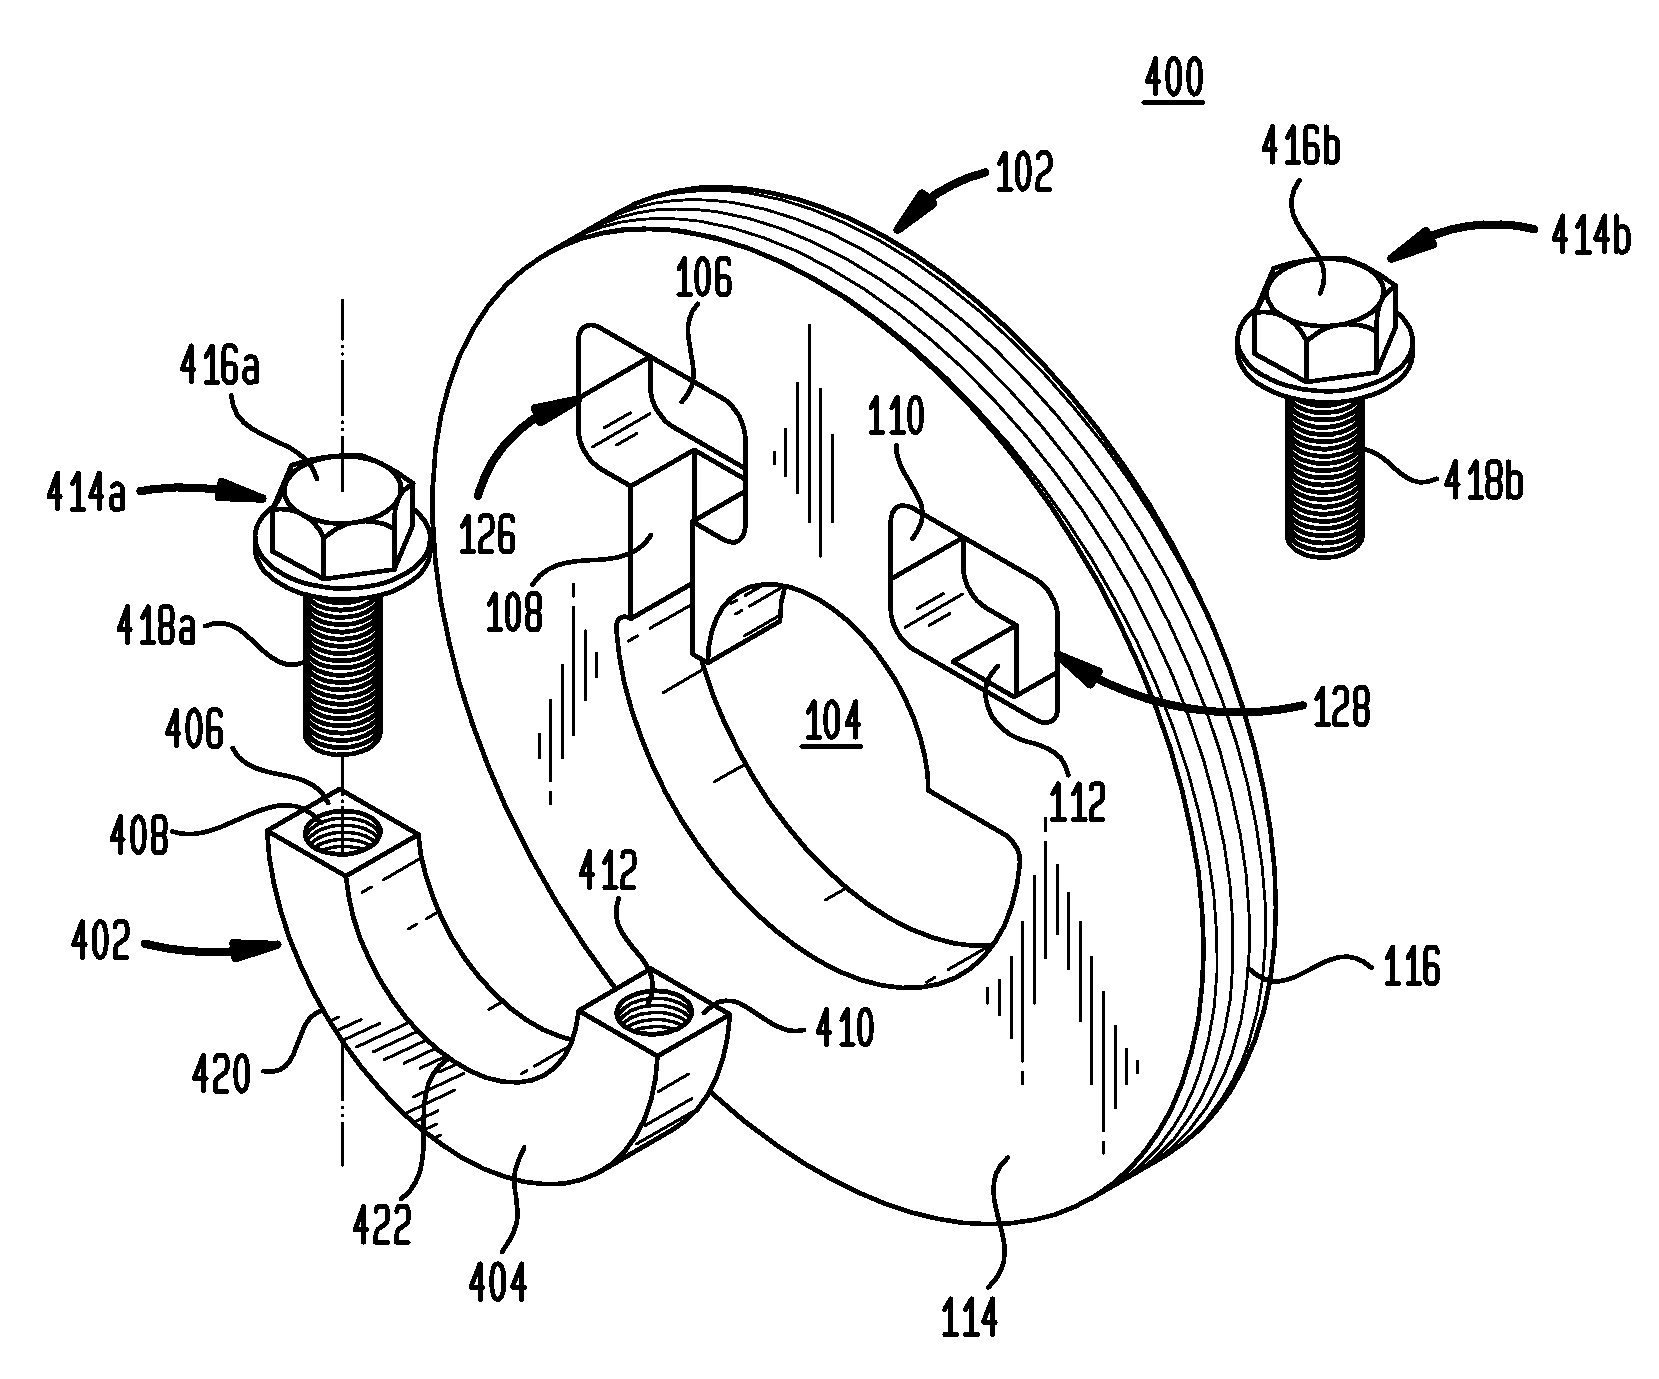 System and method for securing a rotor to a motor drive shaft using a pressure clamp